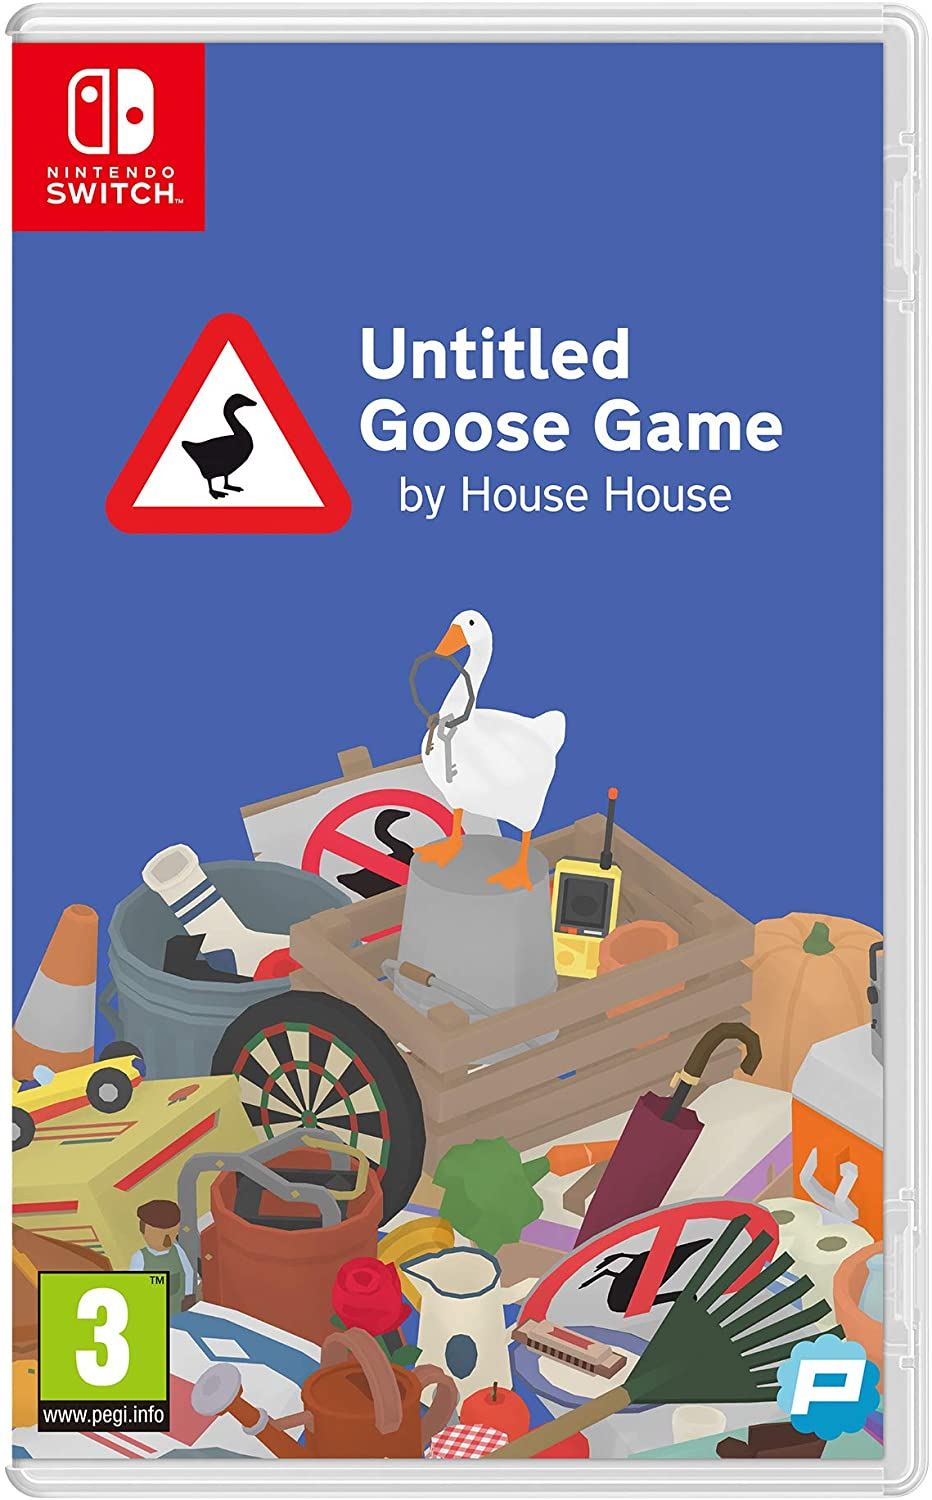 angry goose game download